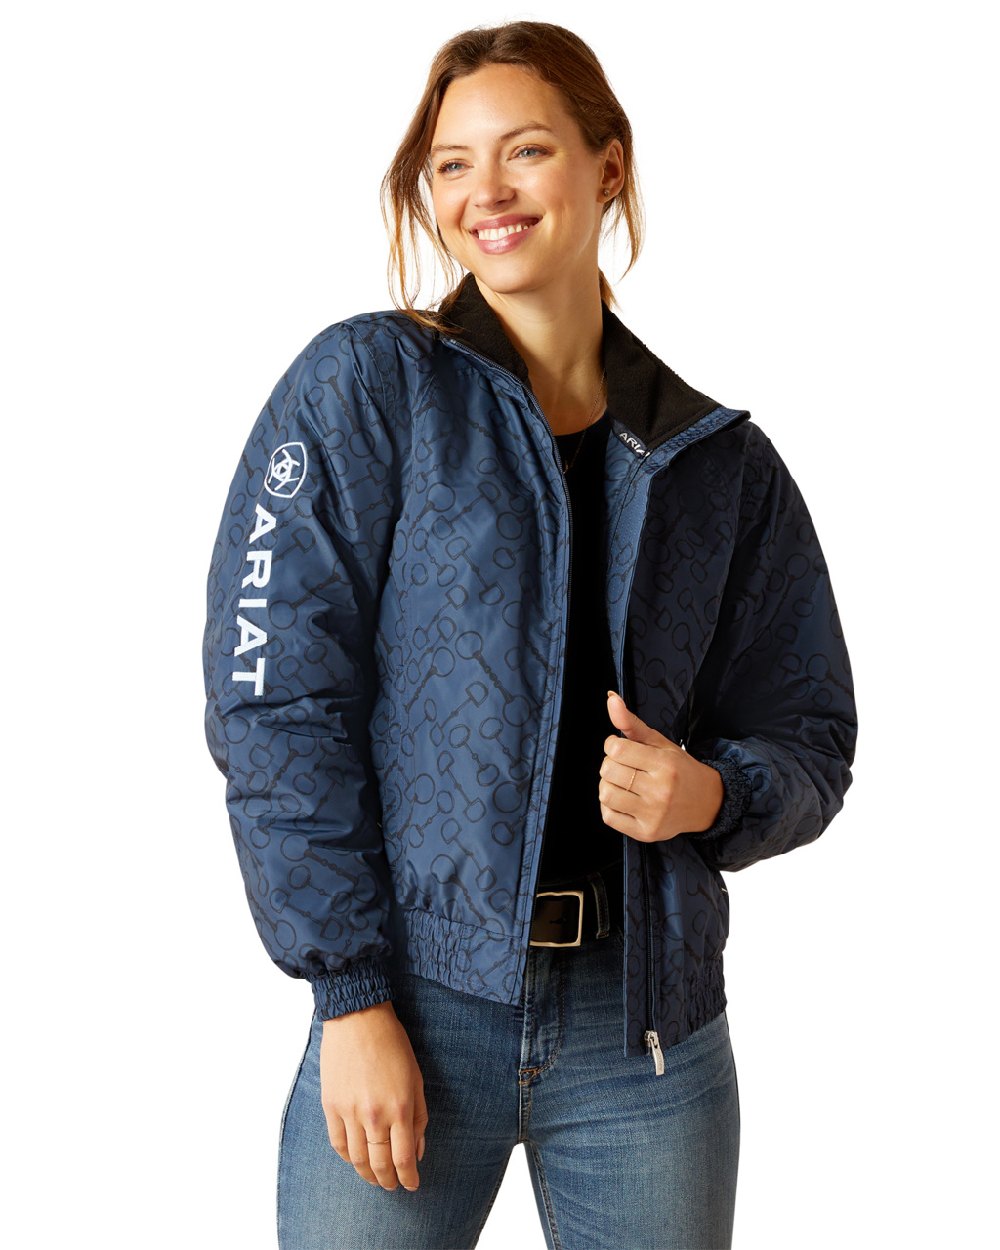 Ariat Womens Stable Insulated Jacket in Sargasso Sea 